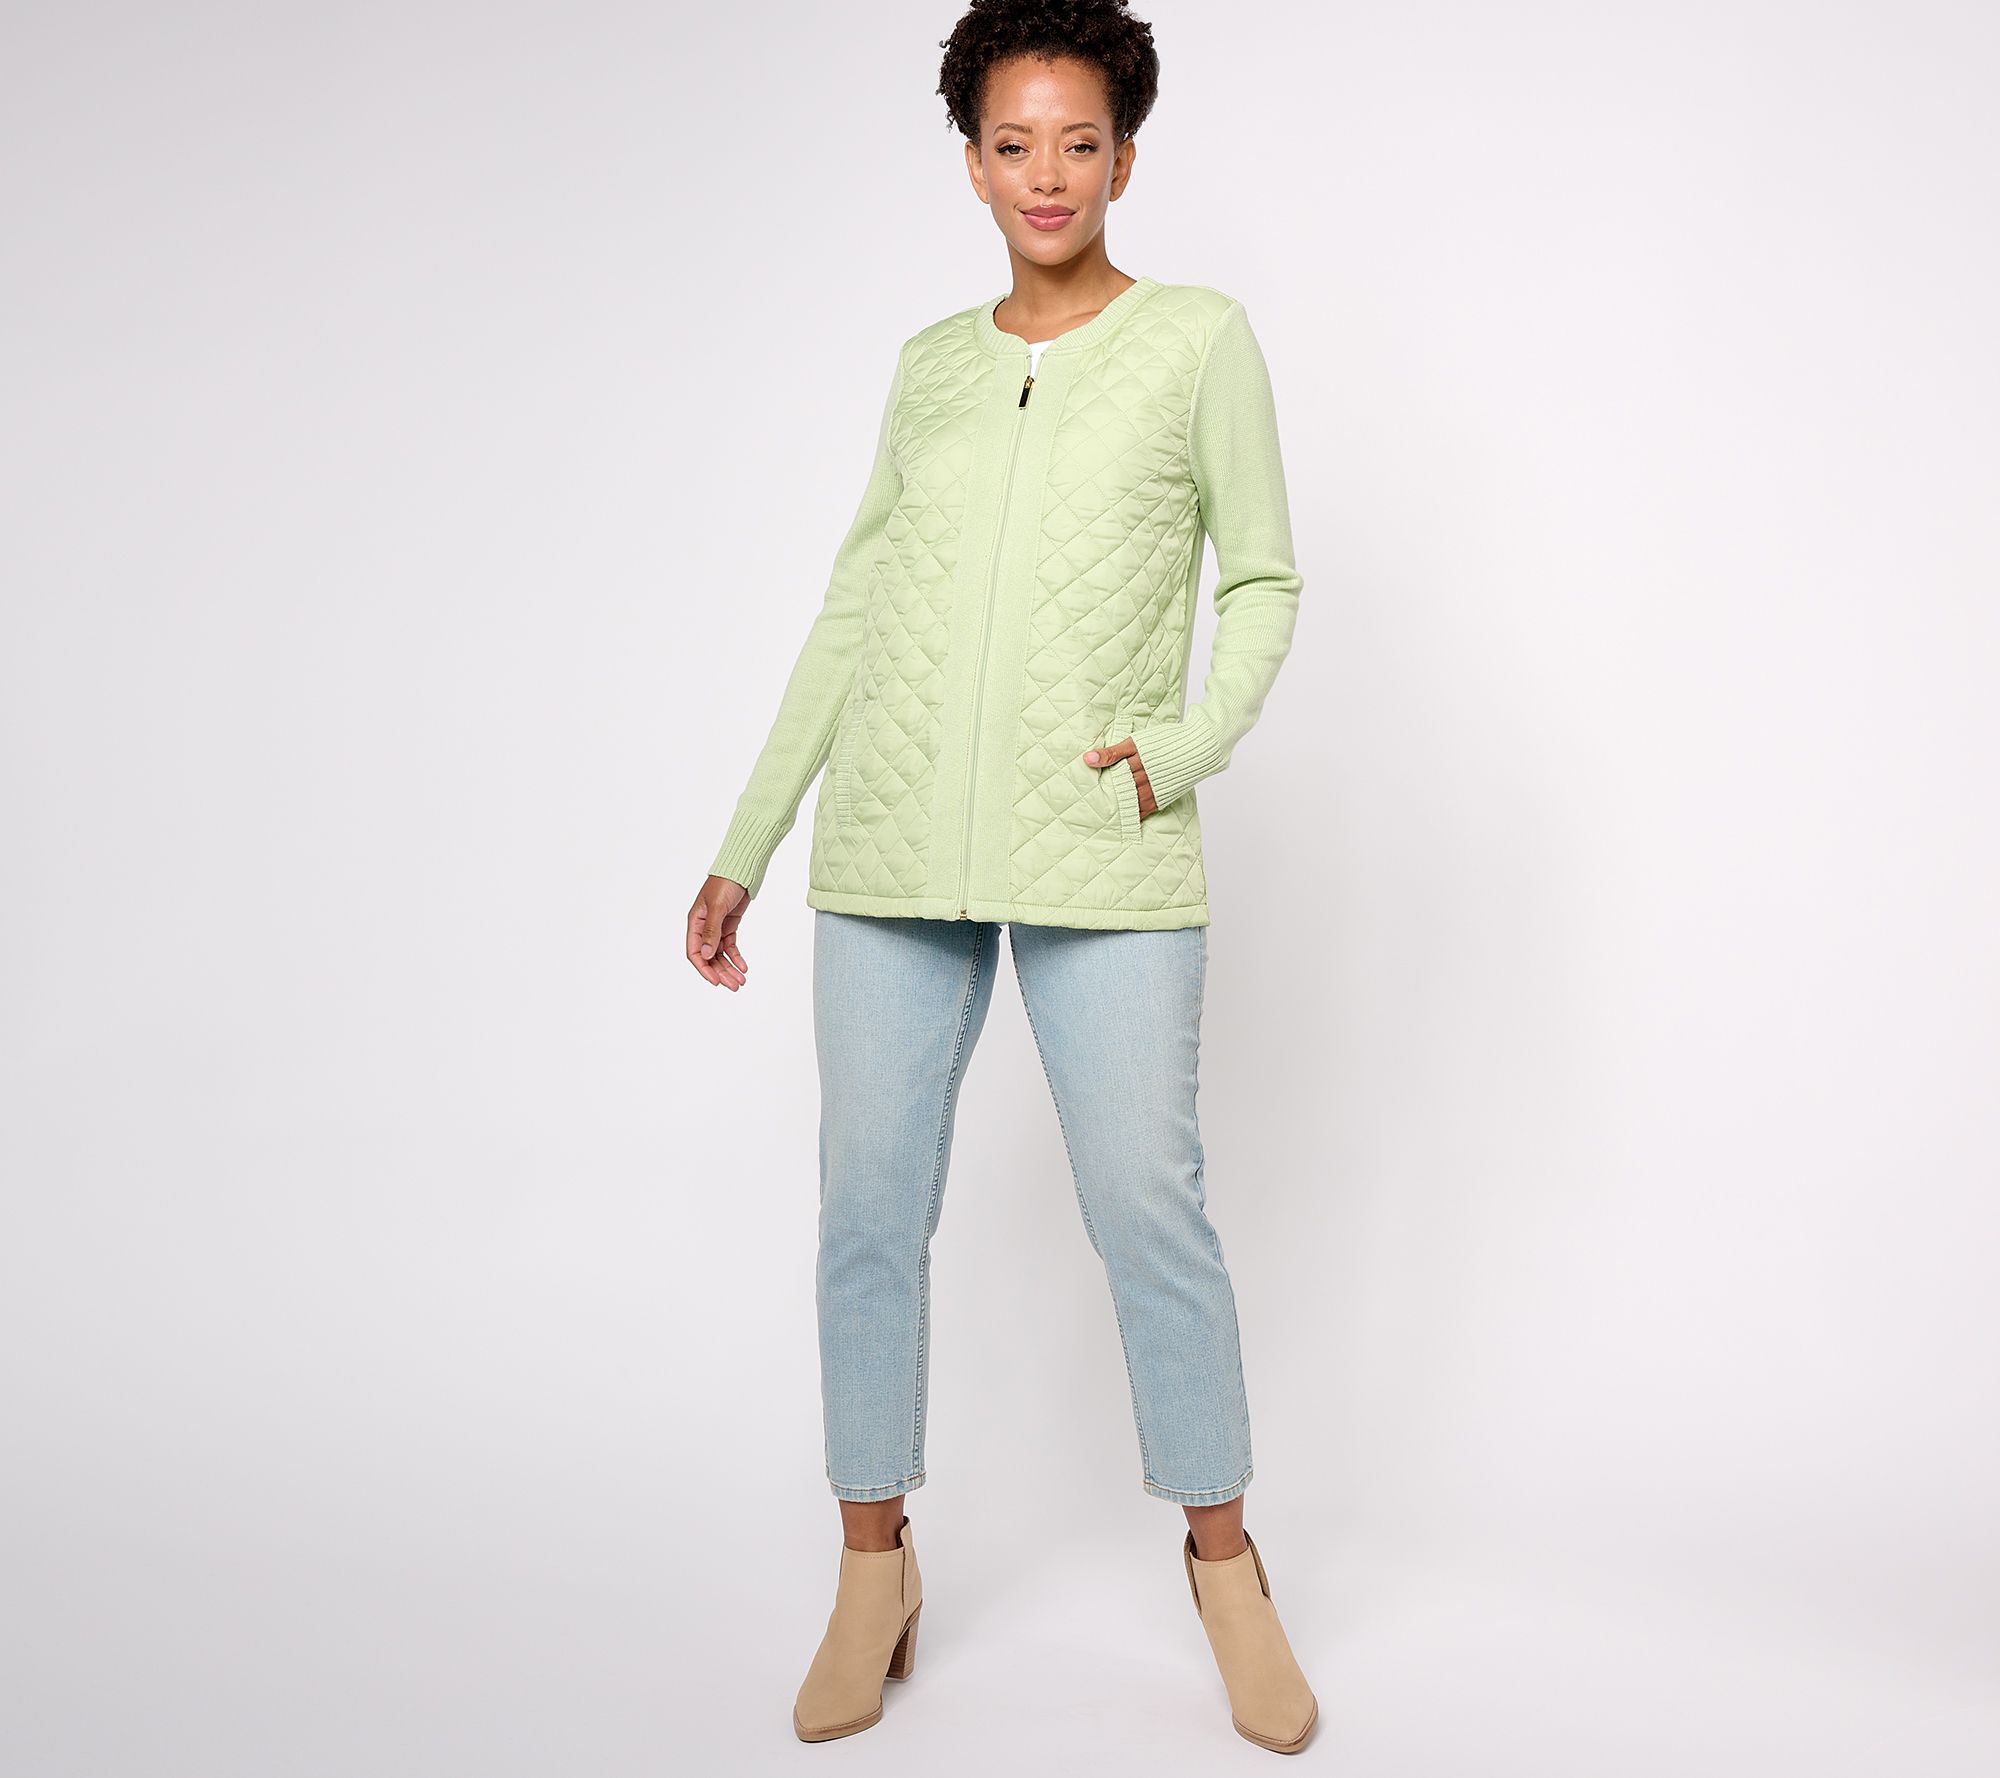 Denim & Co. Heritage Quilted Zip Front Sweater Jacket - QVC.com